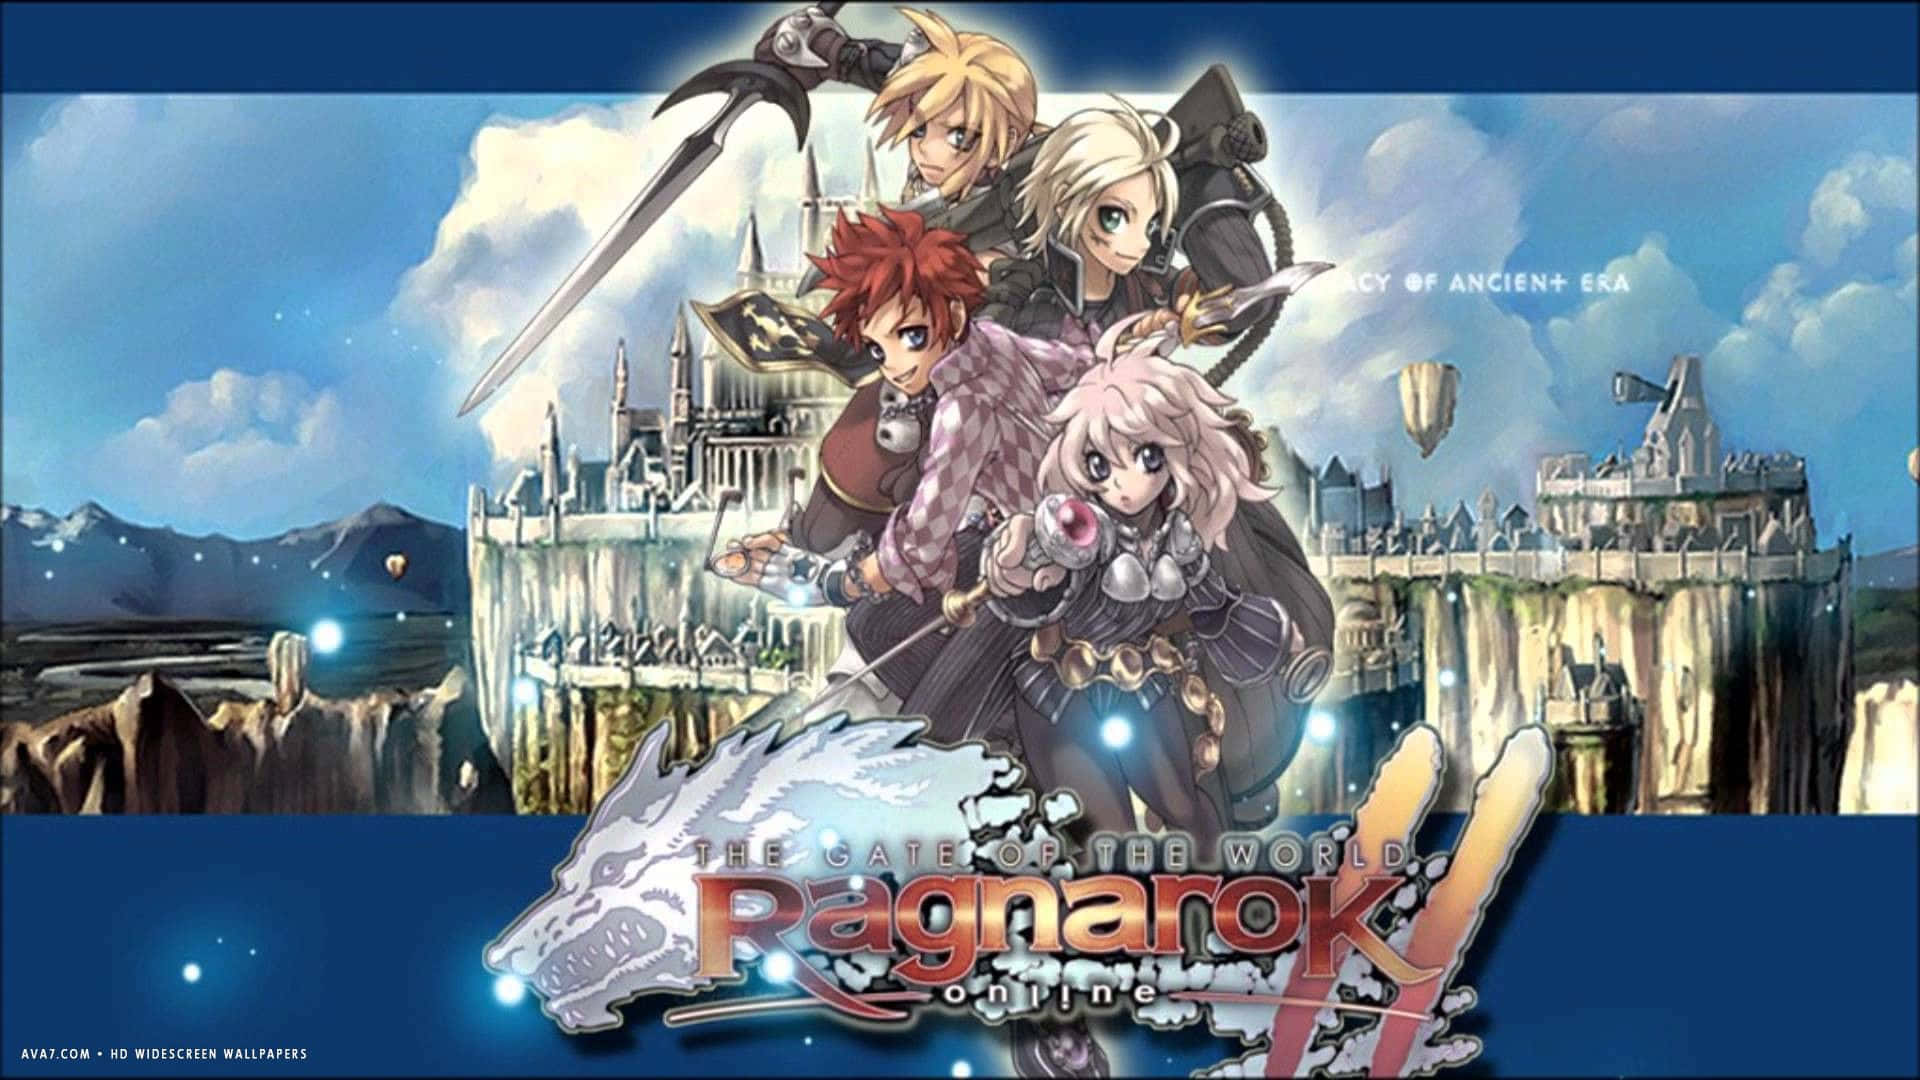 Experience exciting battles and amazing journeys in Ragnarok Online Wallpaper